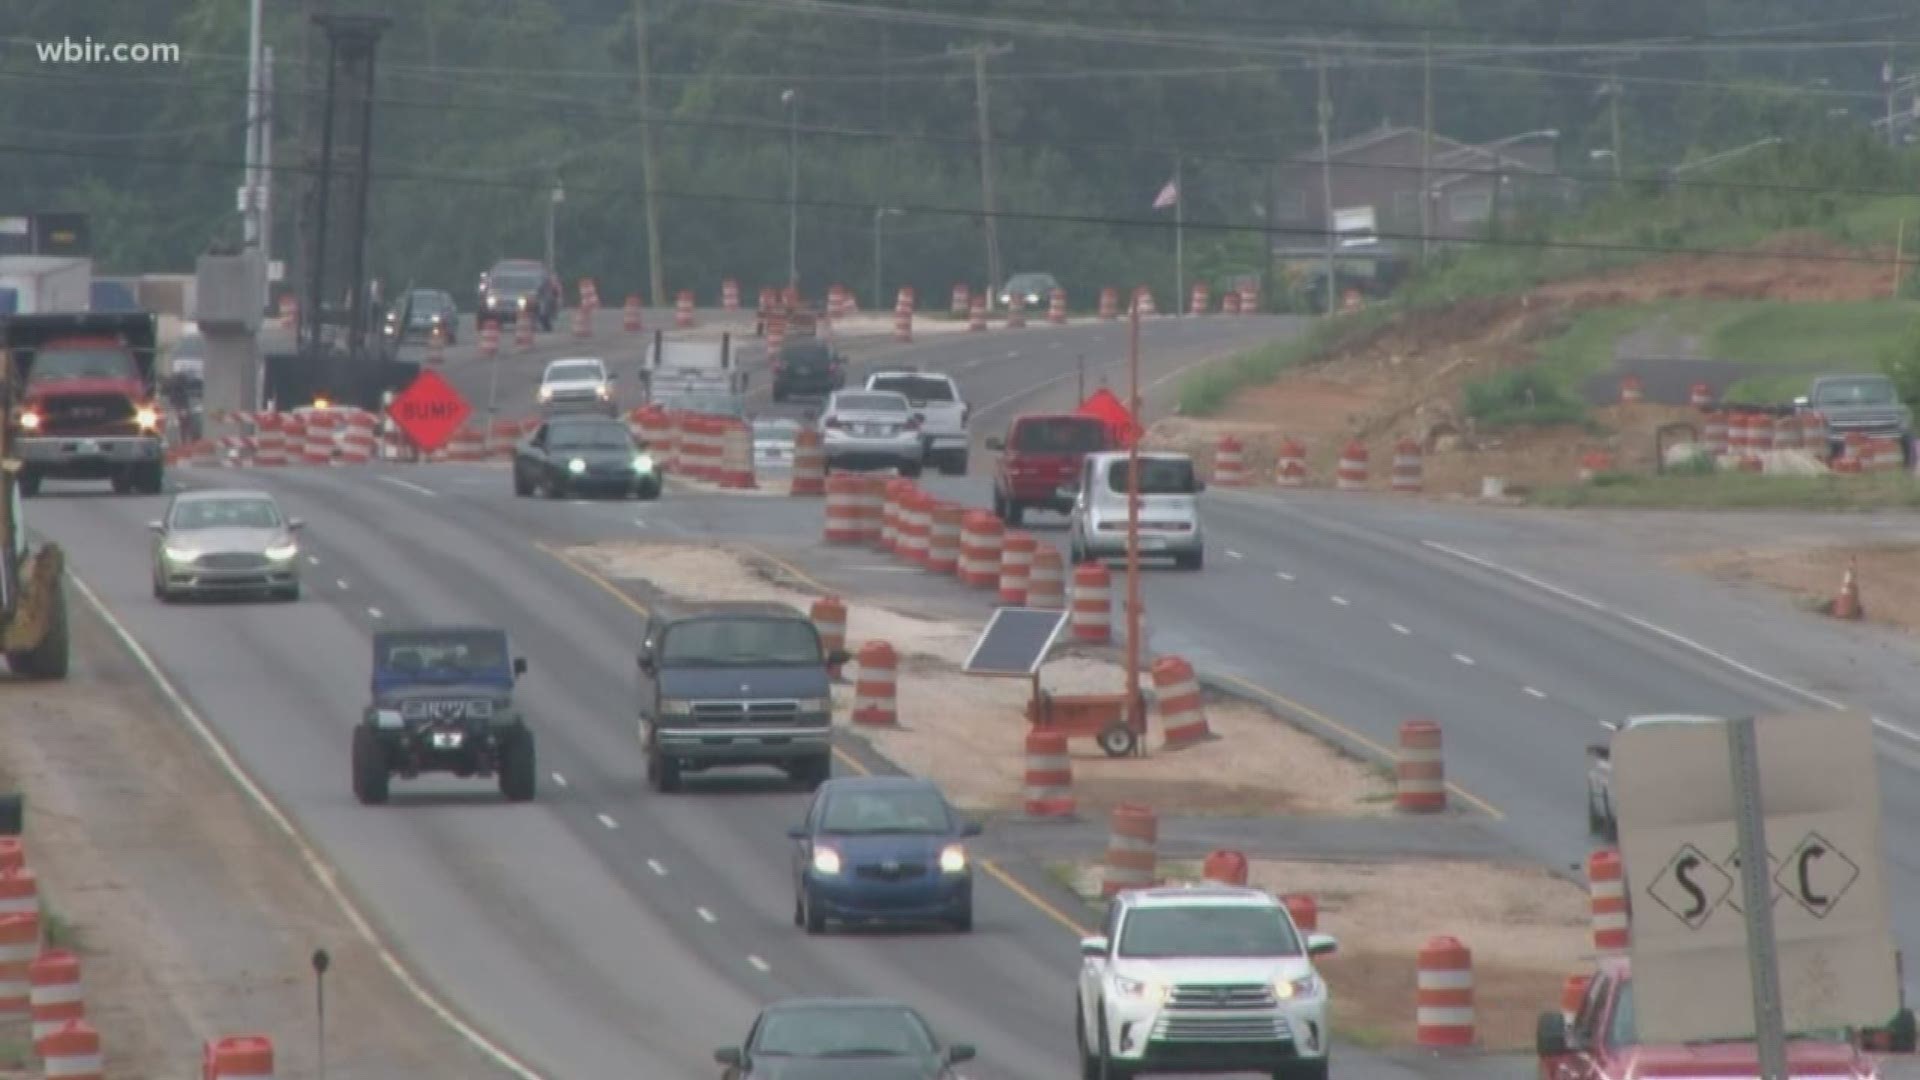 The goal of the study will be to identify ways the city and county can spur development and redevelopment along the Alcoa Highway Corridor in South Knoxville.